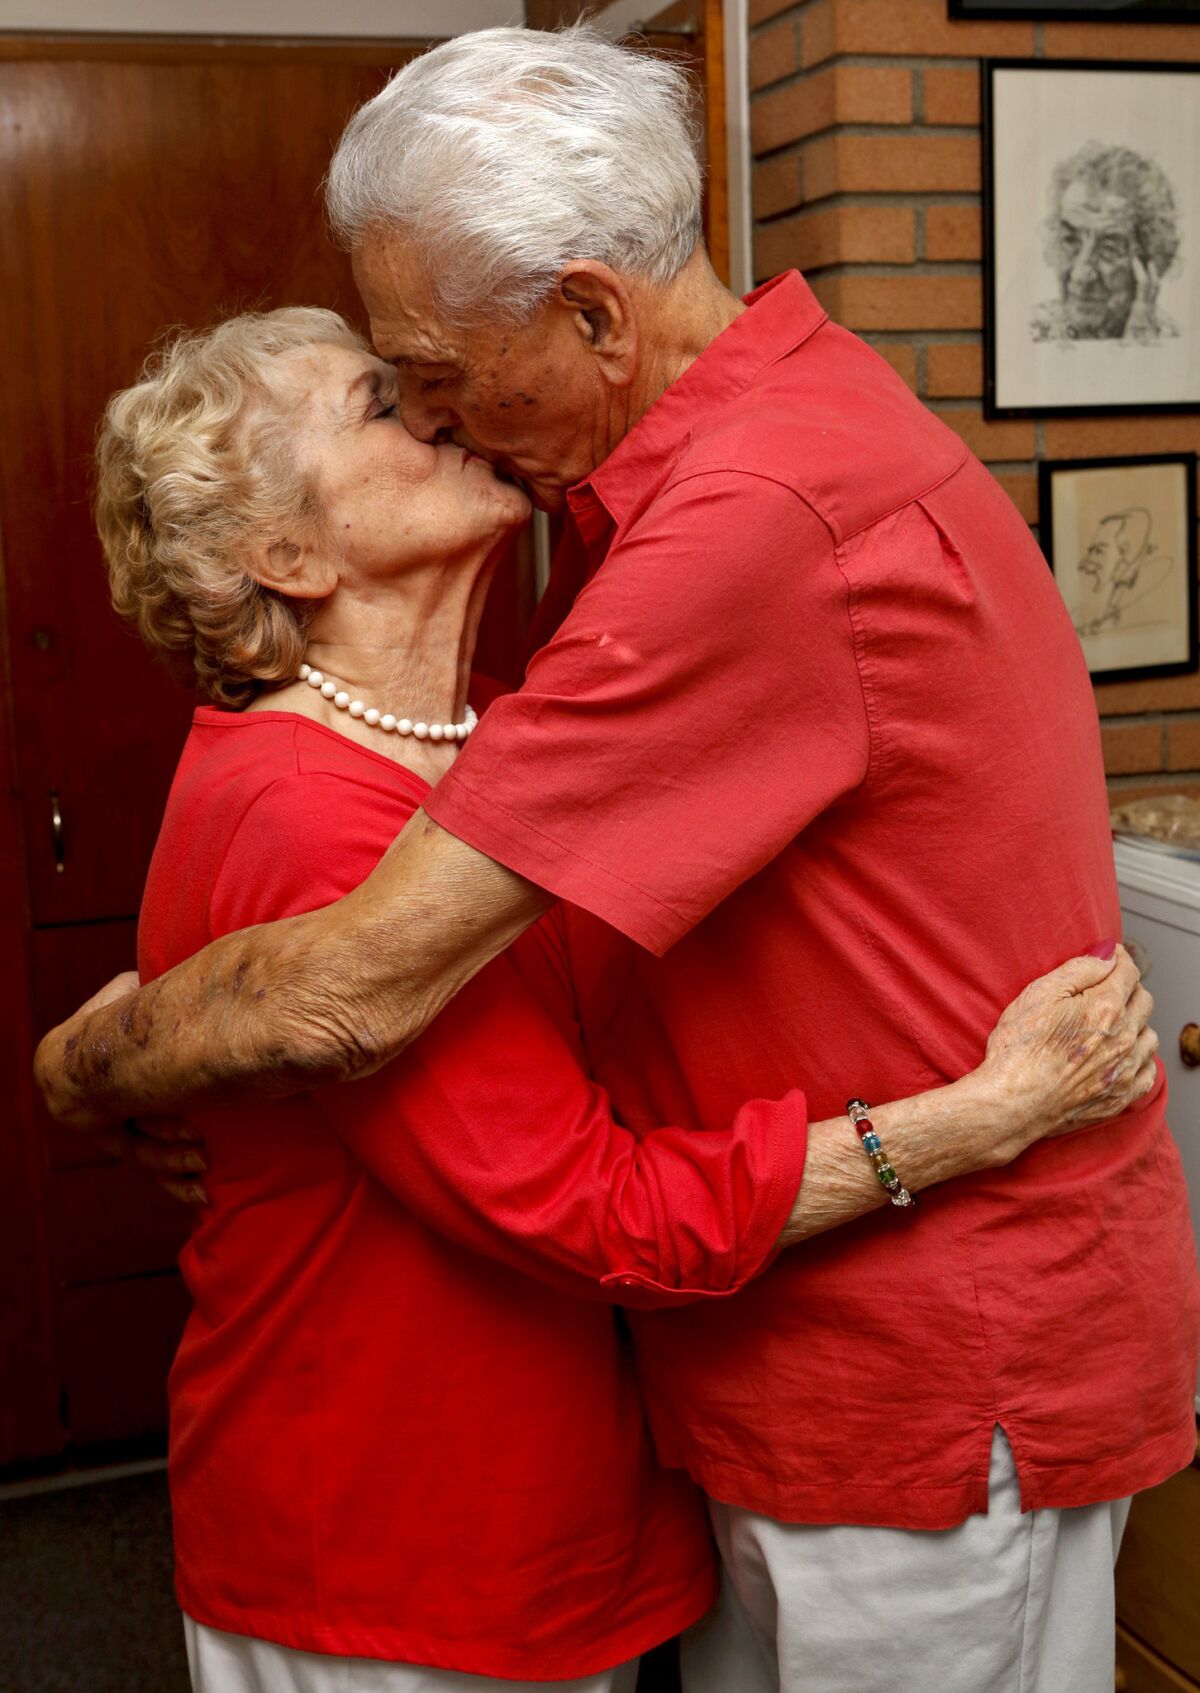 "I think we fell in like, and from falling in like, it grew to love. And at our age that's simply spectacular," 88-year-old Jerri Kane says of her relationship with Ray Sternberg, 93.